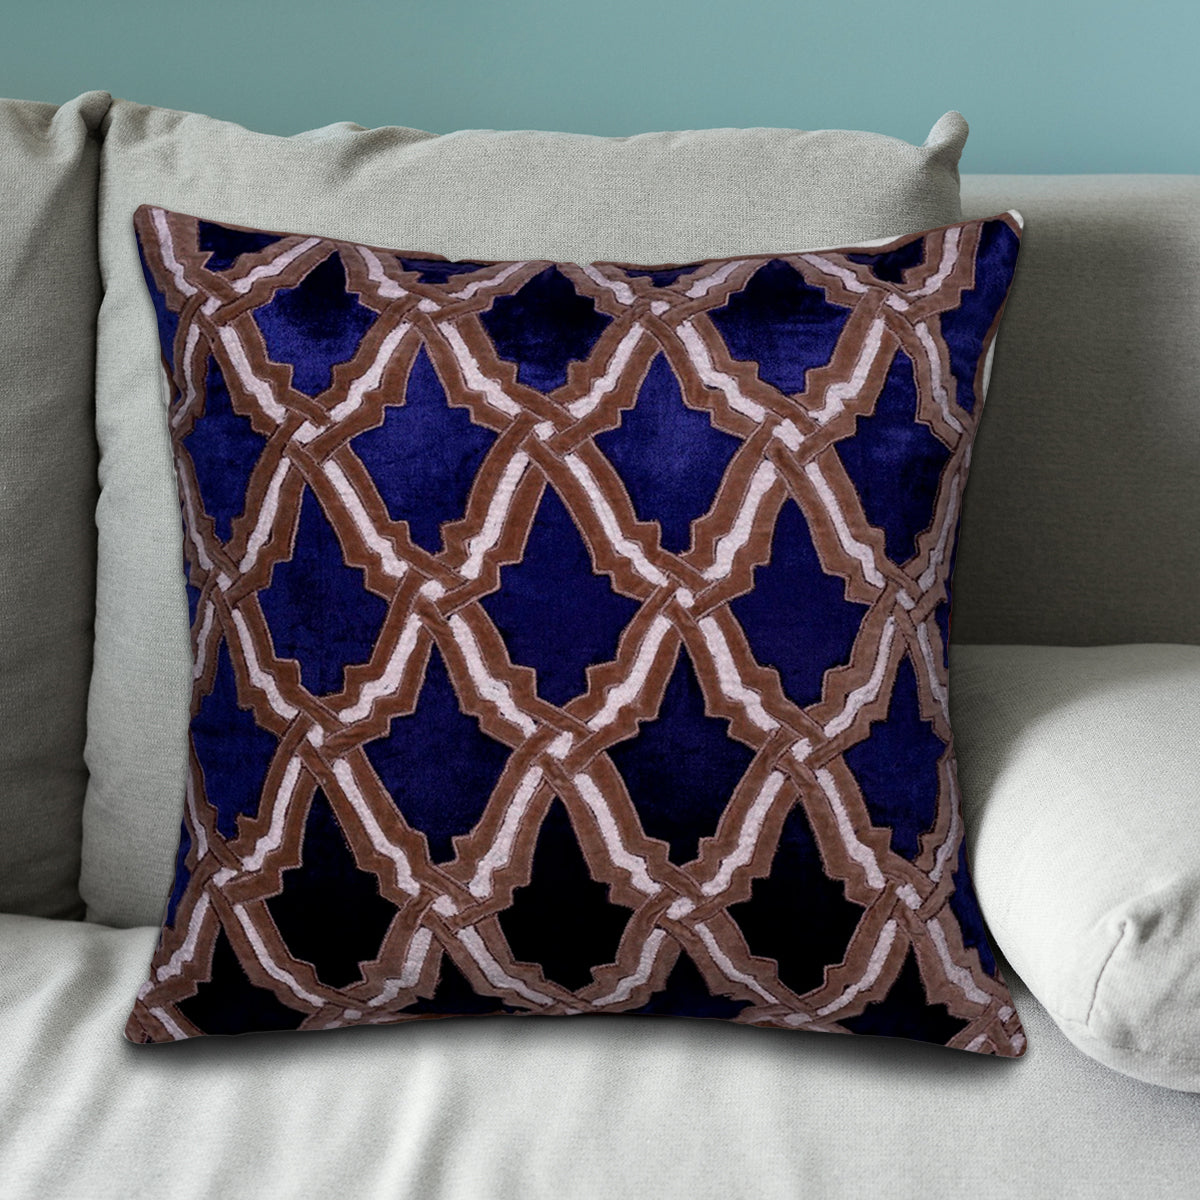 Navy Blue Throw Pillow Covers - Set of 2 and 4, 18 x 18 Inches Set of 2